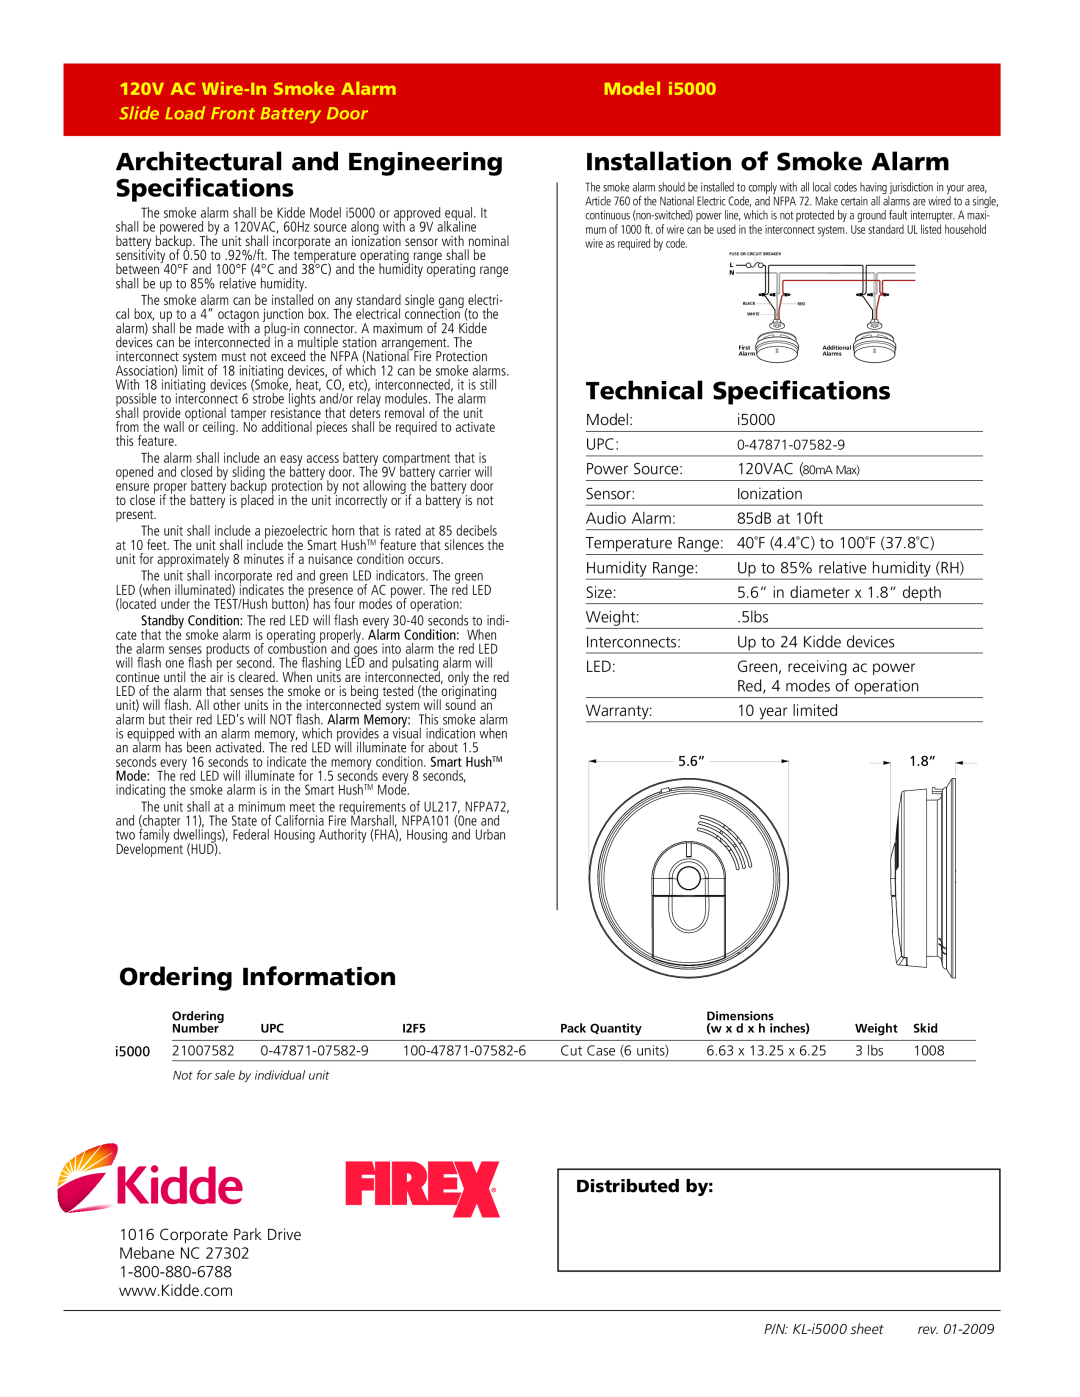 Kidde I5000 warranty Architectural and Engineering Specifications, Ordering Information, Installation of Smoke Alarm, Model 